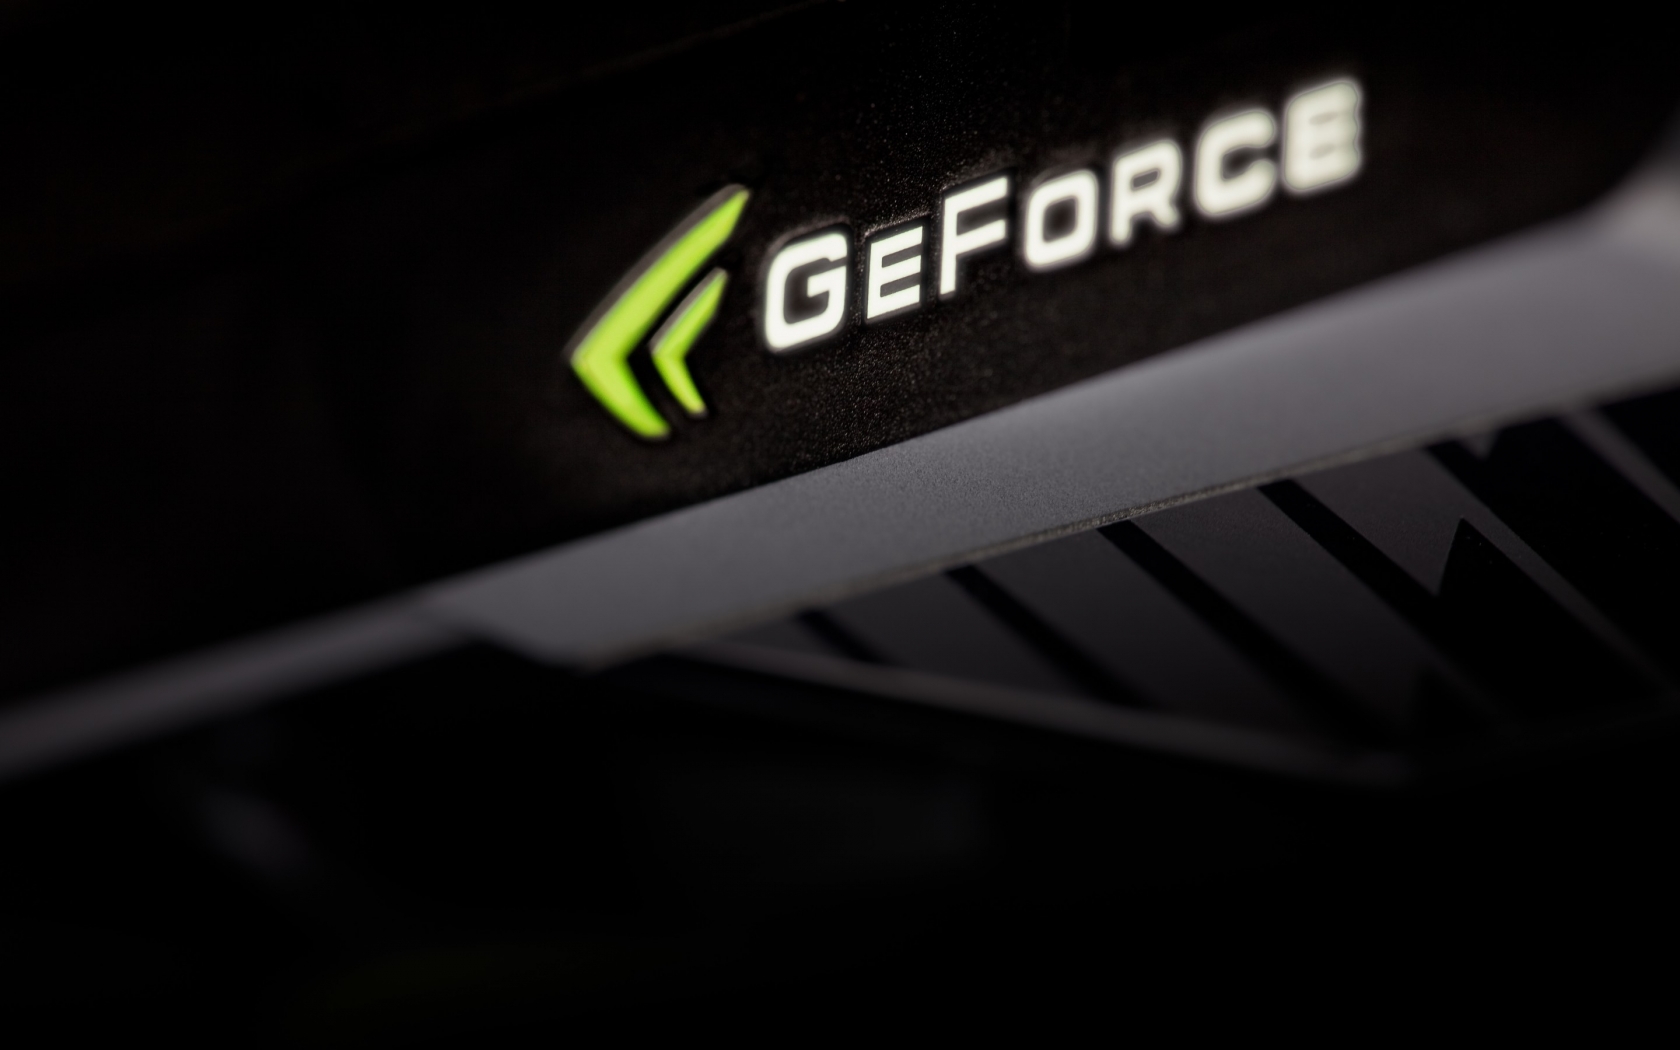 GeForce Graphics for 1680 x 1050 widescreen resolution